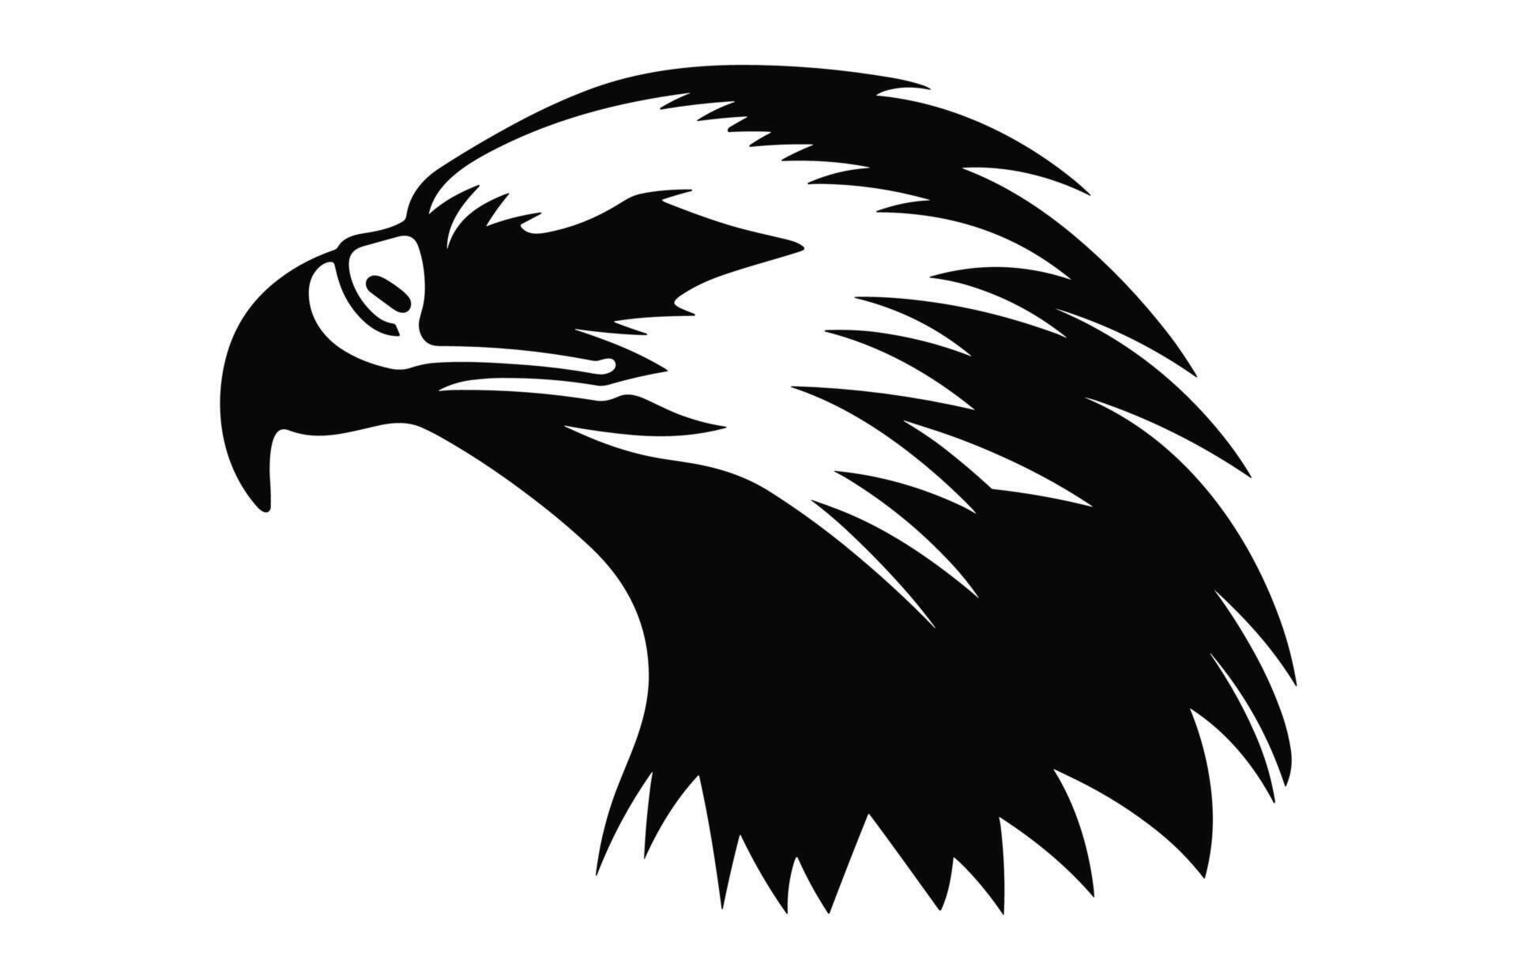 Bald Eagle Head Silhouette Vector, Eagle face black Clipart isolated on a white background vector